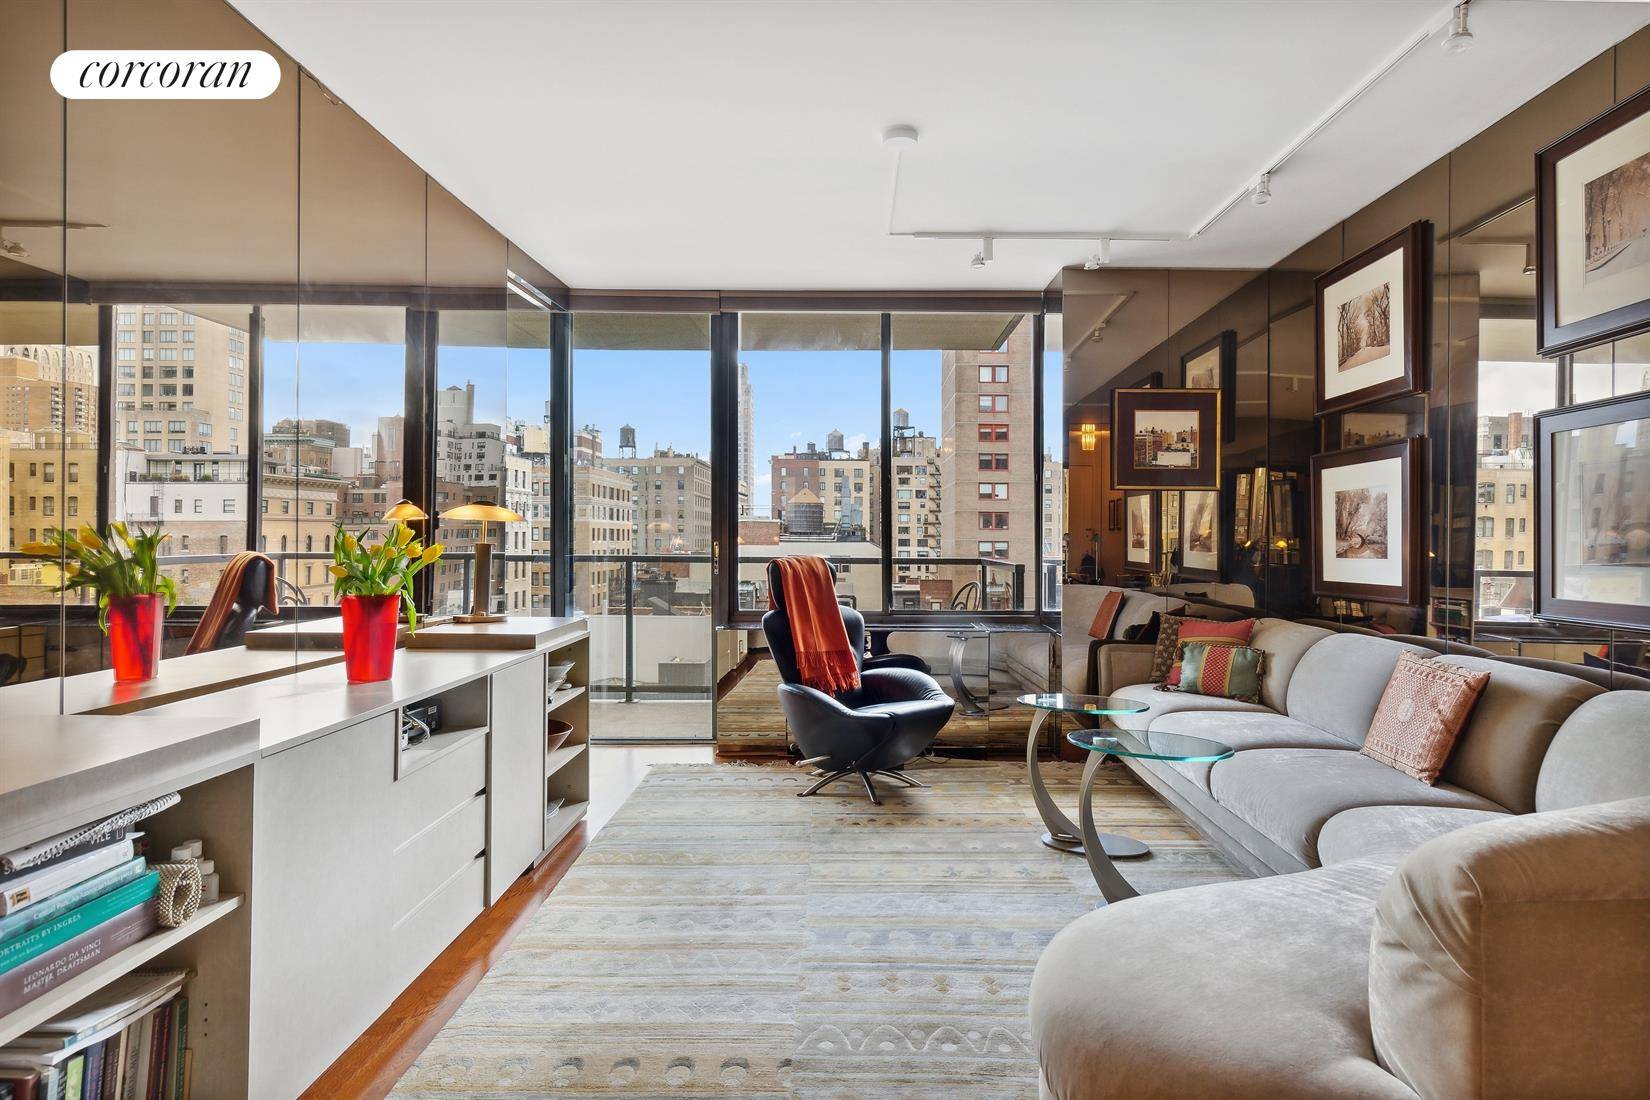 1001 Fifth Avenue 82nd Street Exceptional light filled 1 Bedroom, 1 Bathroom Co op apartment with open city views and a large Balcony that has space for dining and entertaining.